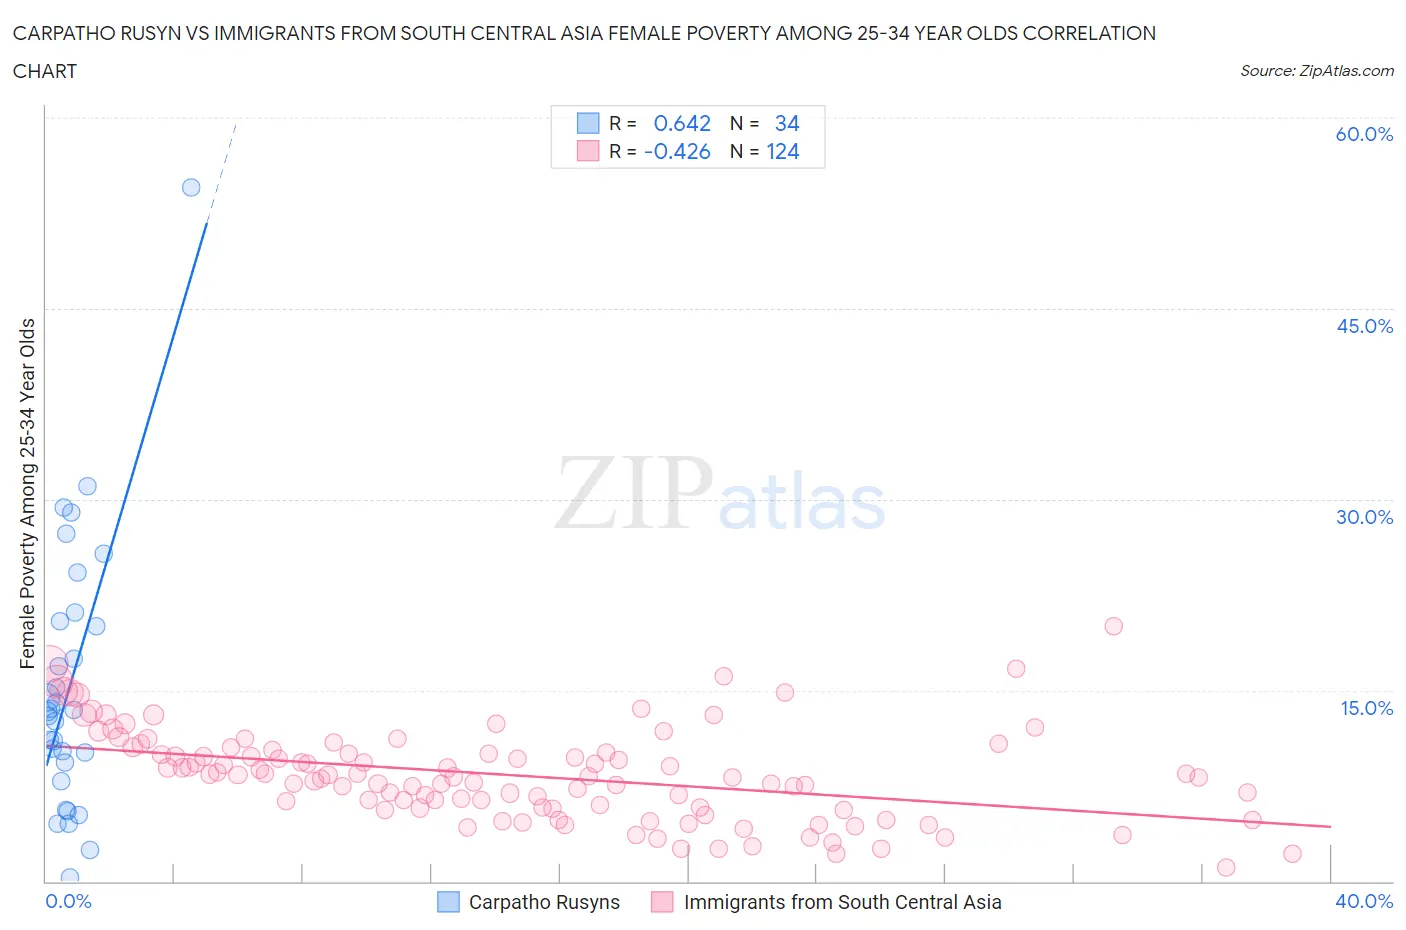 Carpatho Rusyn vs Immigrants from South Central Asia Female Poverty Among 25-34 Year Olds